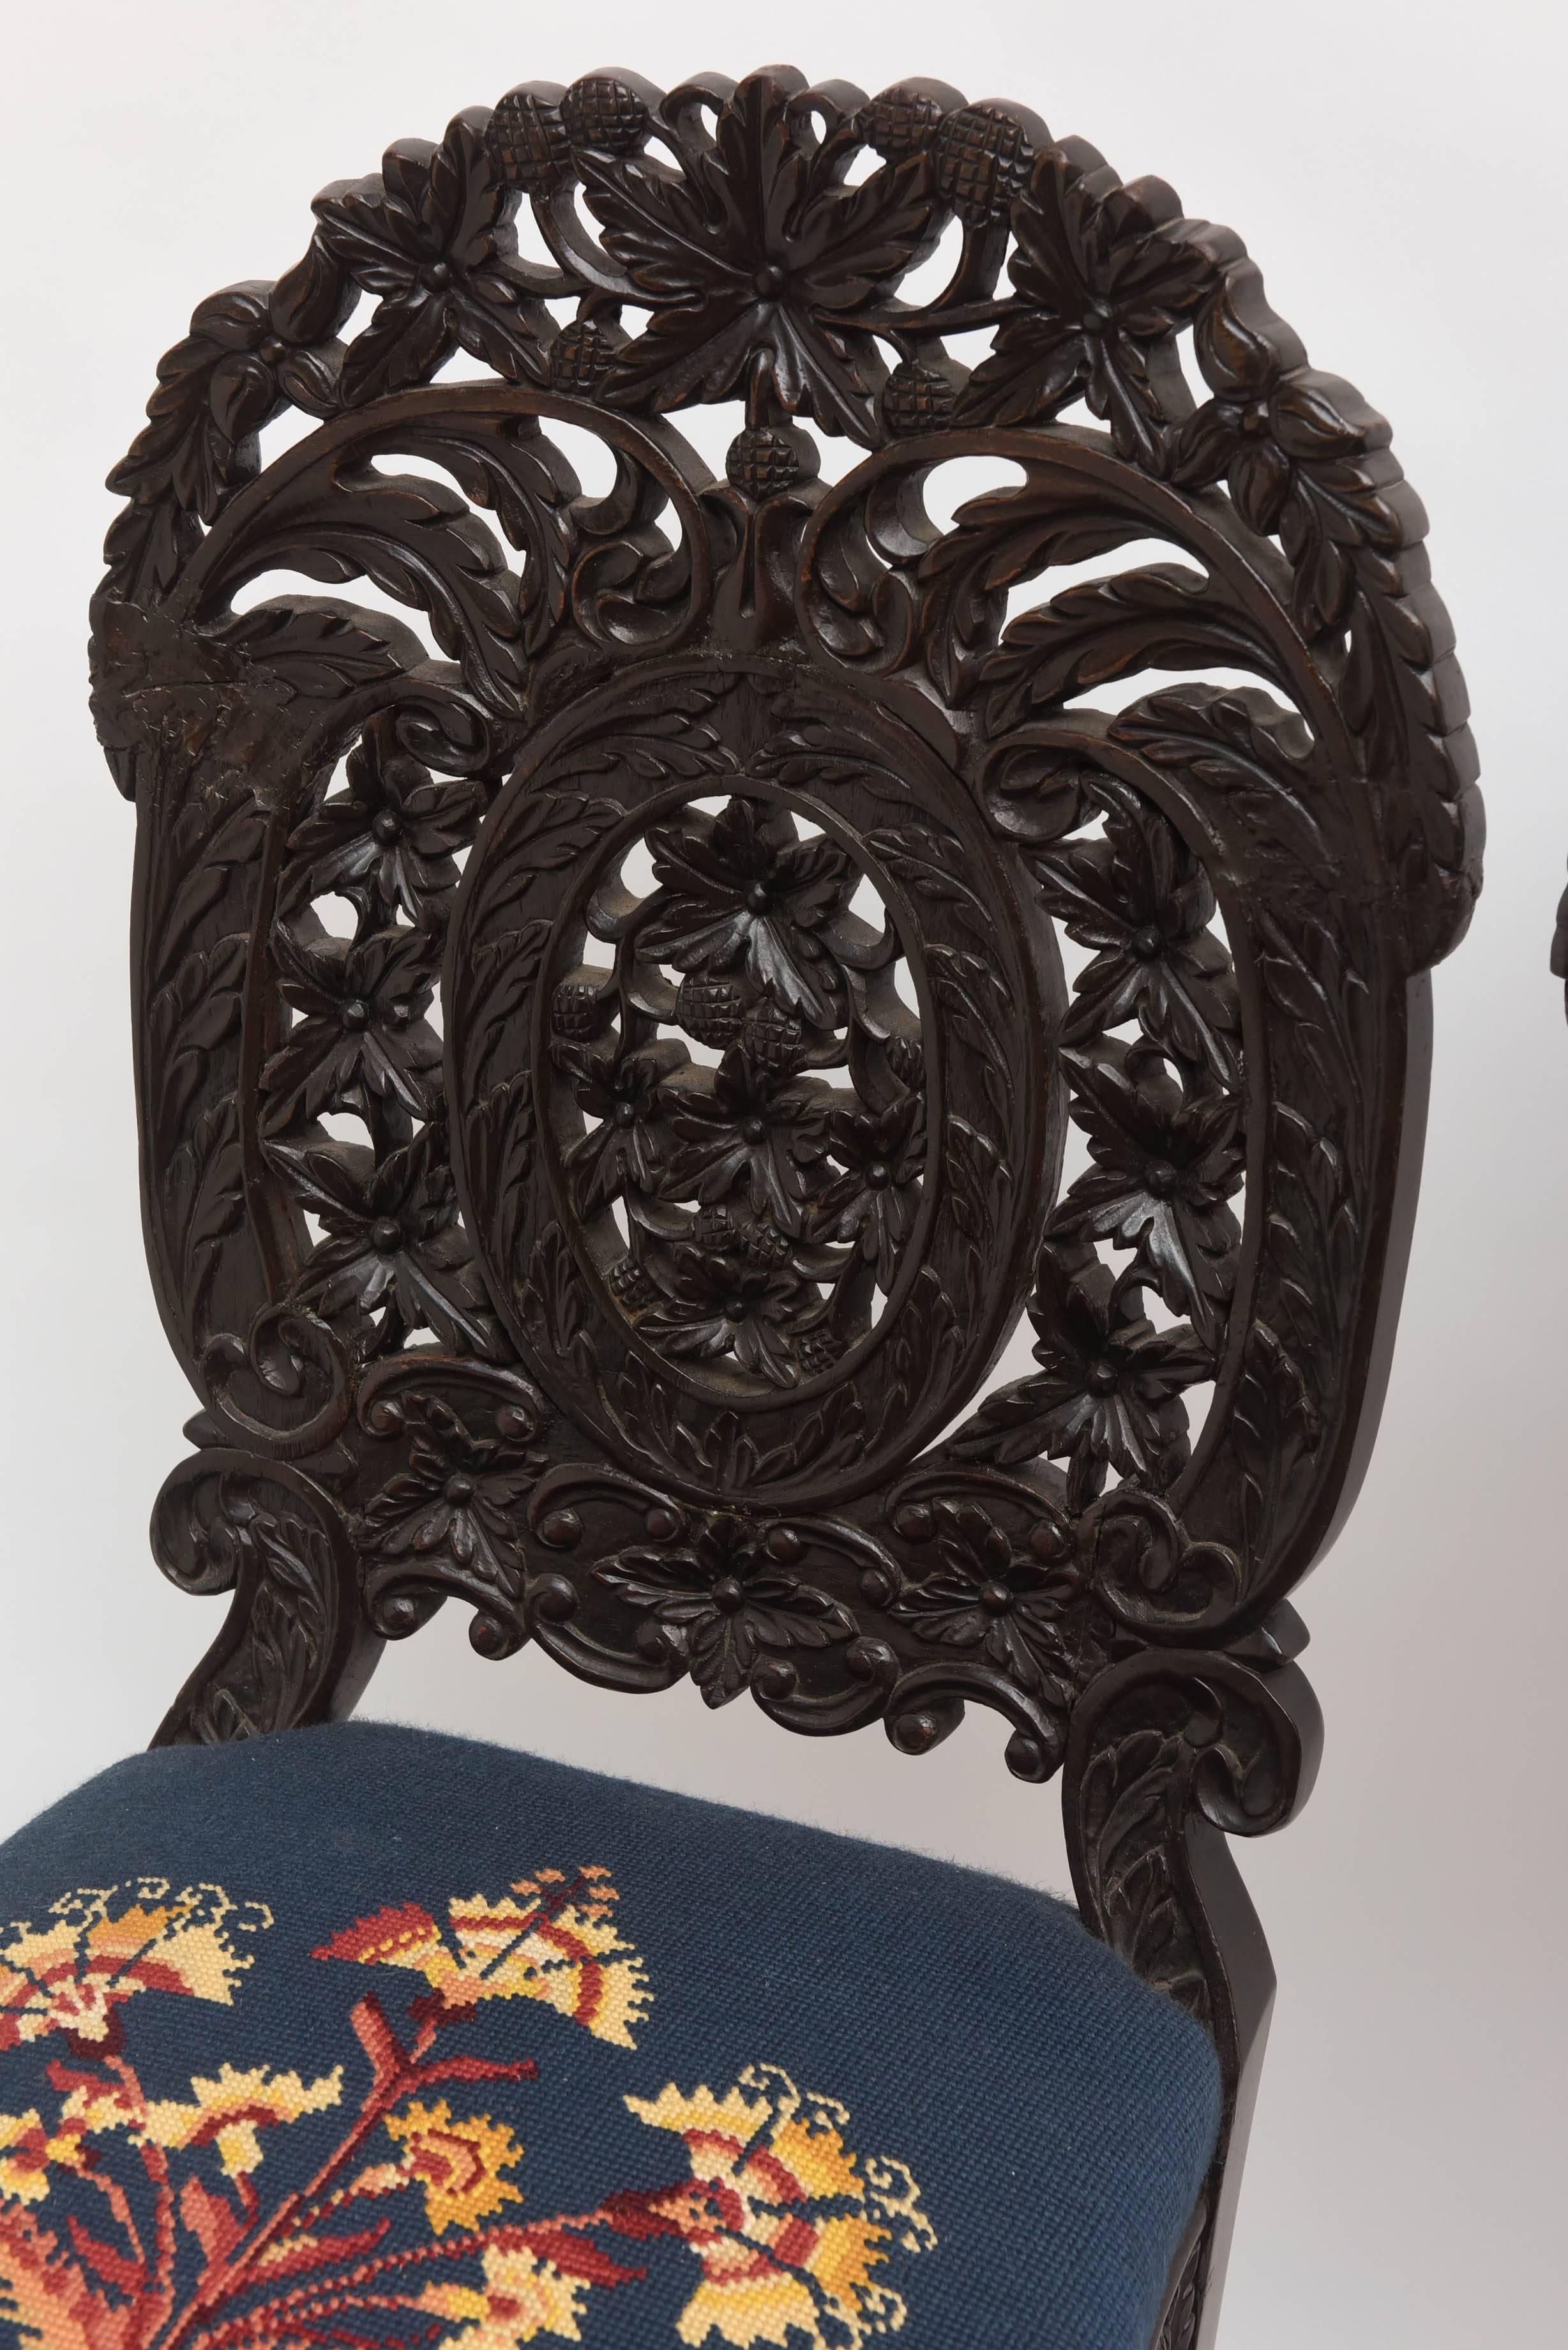 An exceptional and rare set  with superior and intricate leaf and berry carving. Unusual form and style. The chairs are priced as pairs. Price is for one pair only.